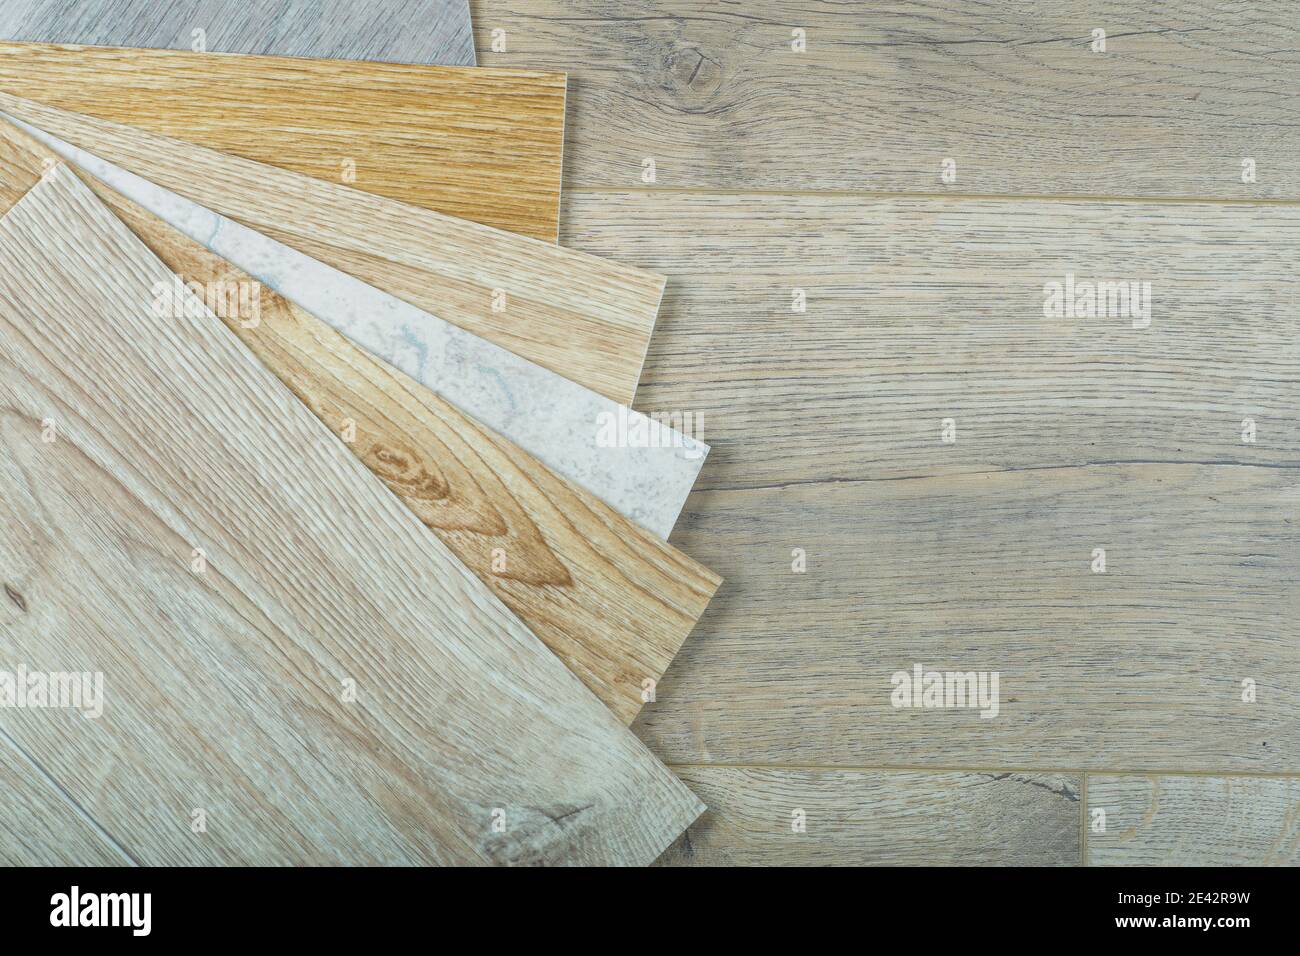 Vinyl and linoleum samples on a wooden background. Vinyl for flooring with wood grain texture and pattern. Stock Photo